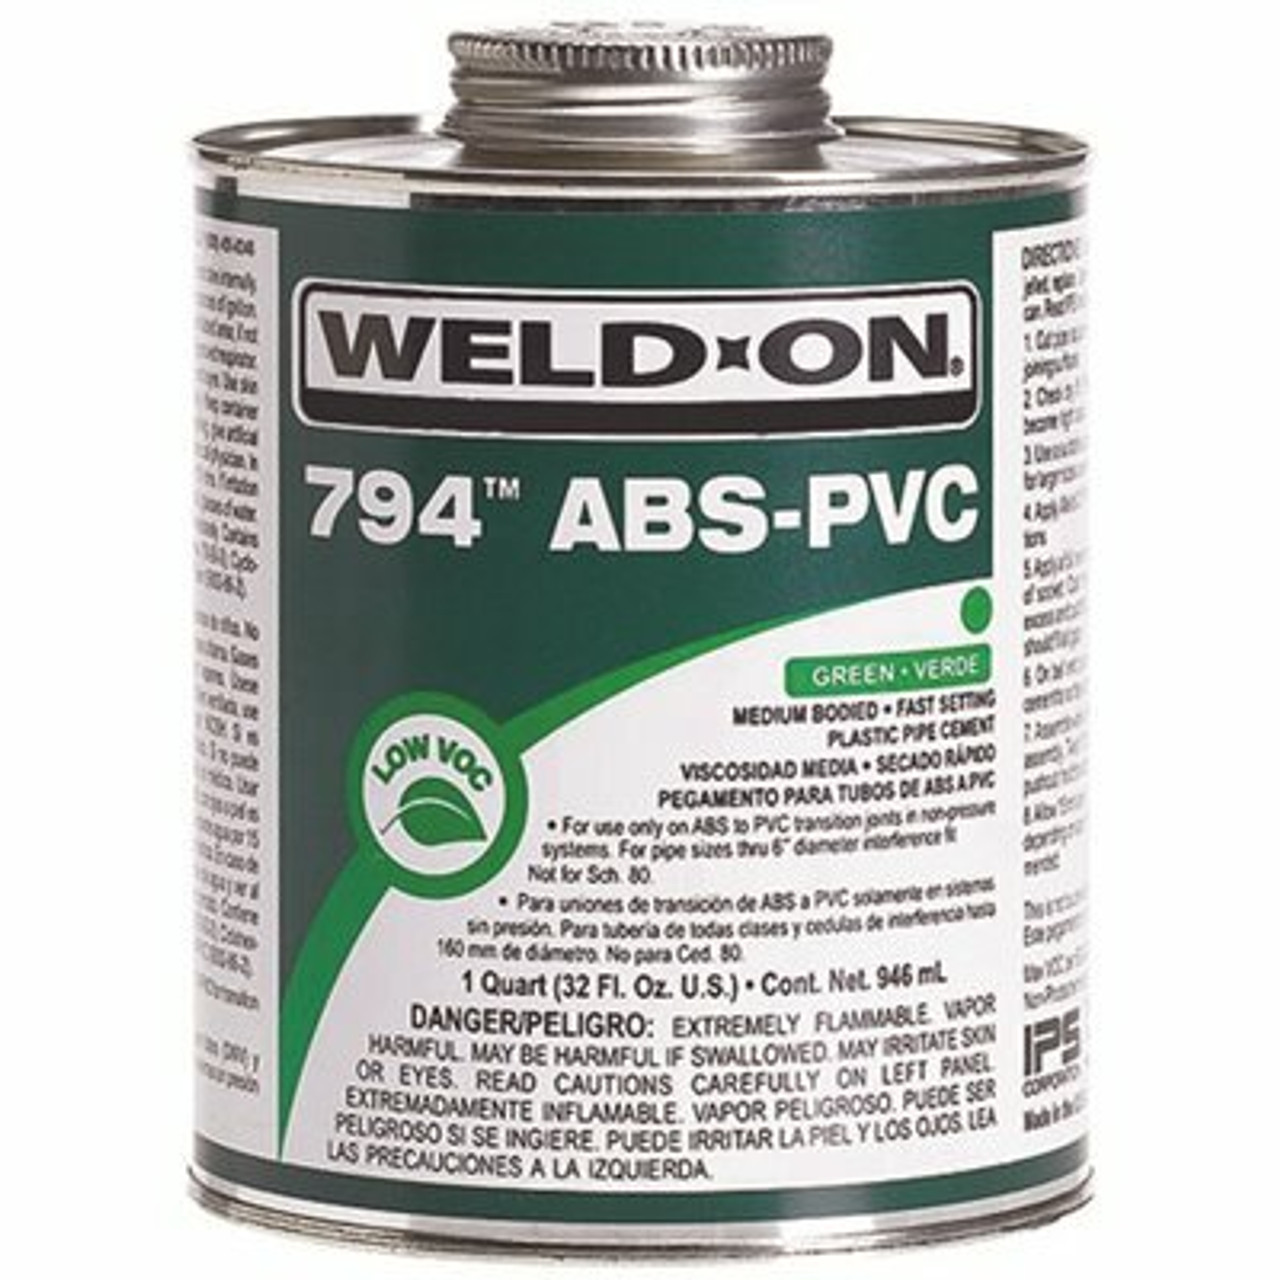 Weld-On 8 Oz. Abs Pvc 794 Transition Cement In Green